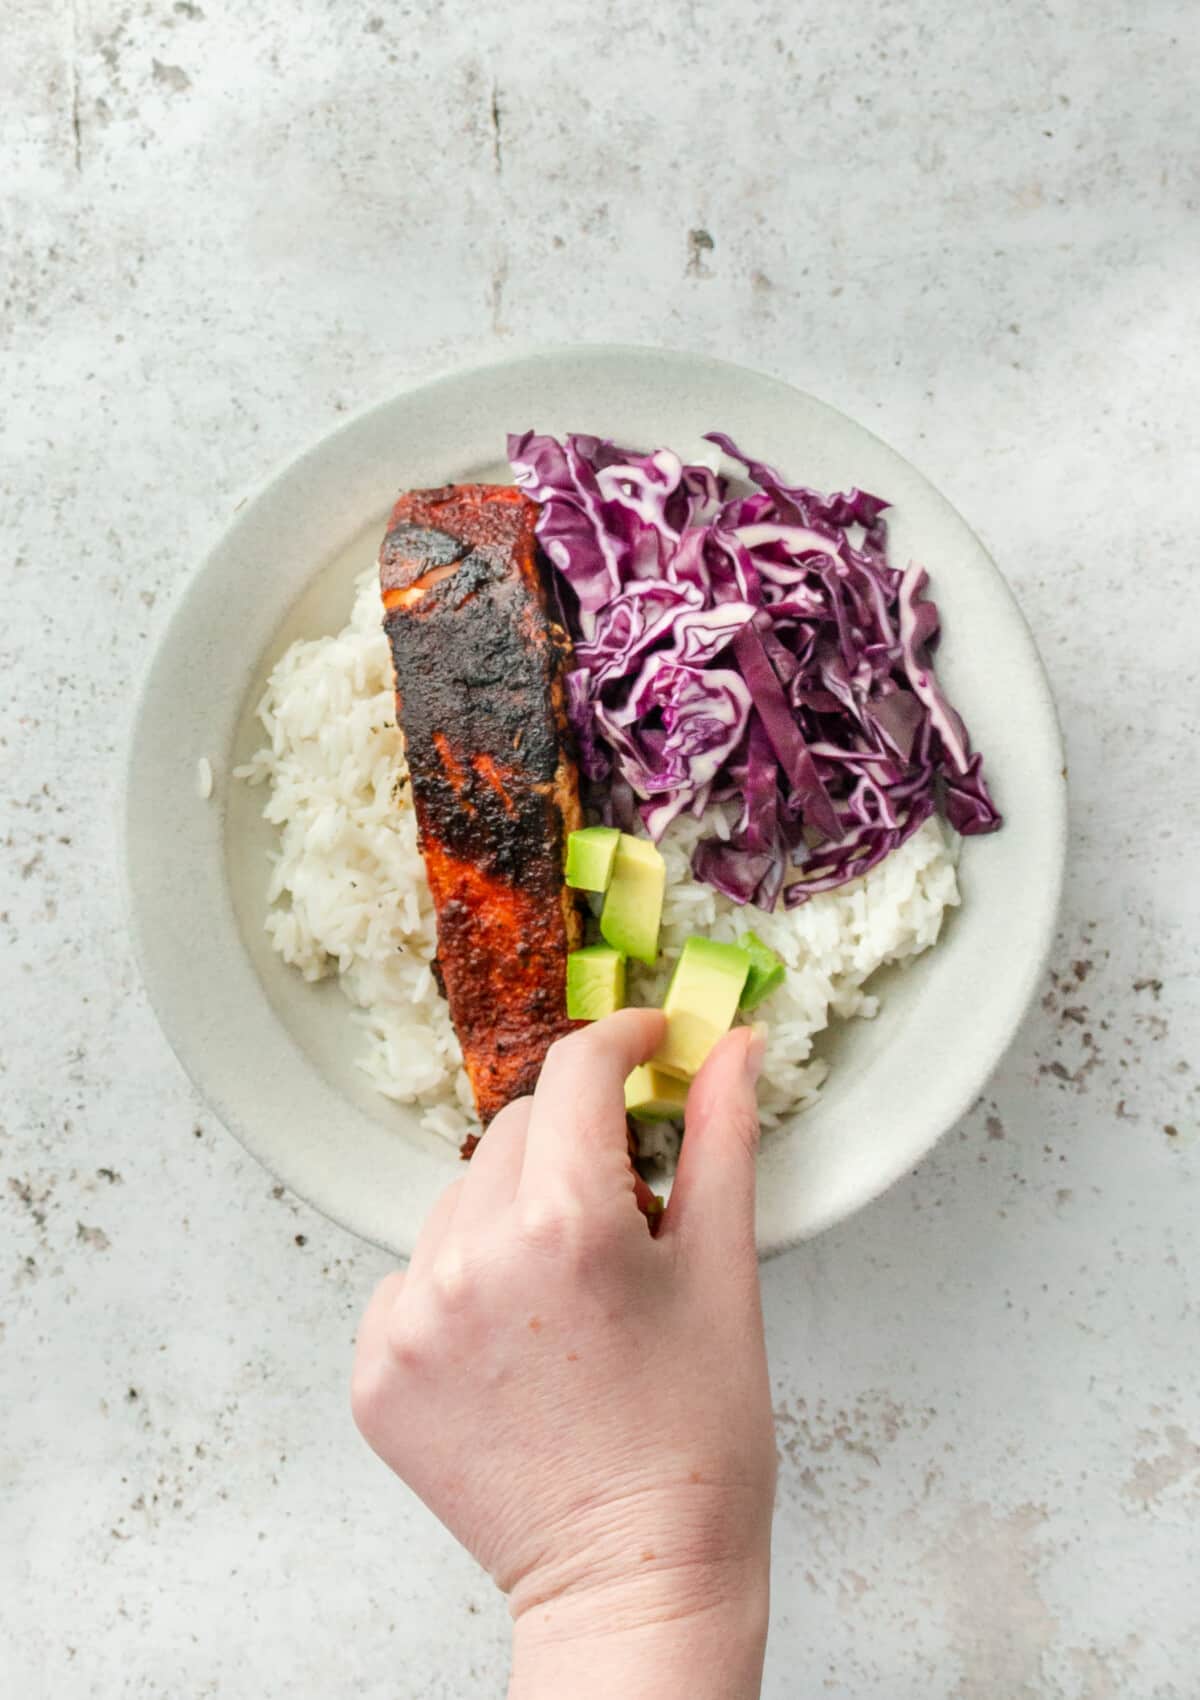 A cube of avocado is shown being placed on top of coconut rice beside blackened salmon and shredded purple cabbage on a light grey colored surface.